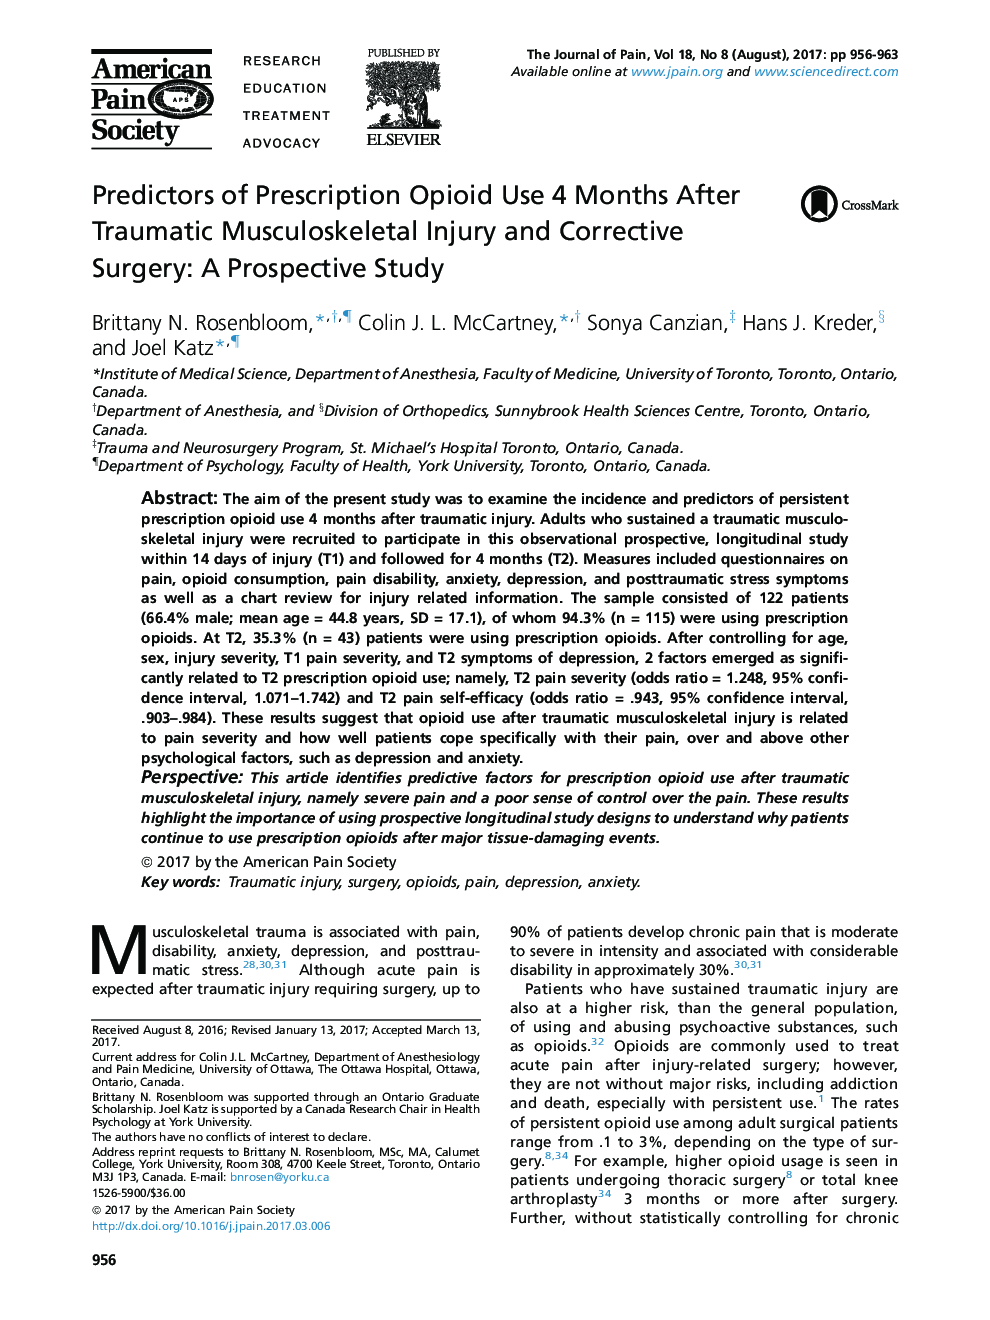 Predictors of Prescription Opioid Use 4Â Months After Traumatic Musculoskeletal Injury and Corrective Surgery: A Prospective Study